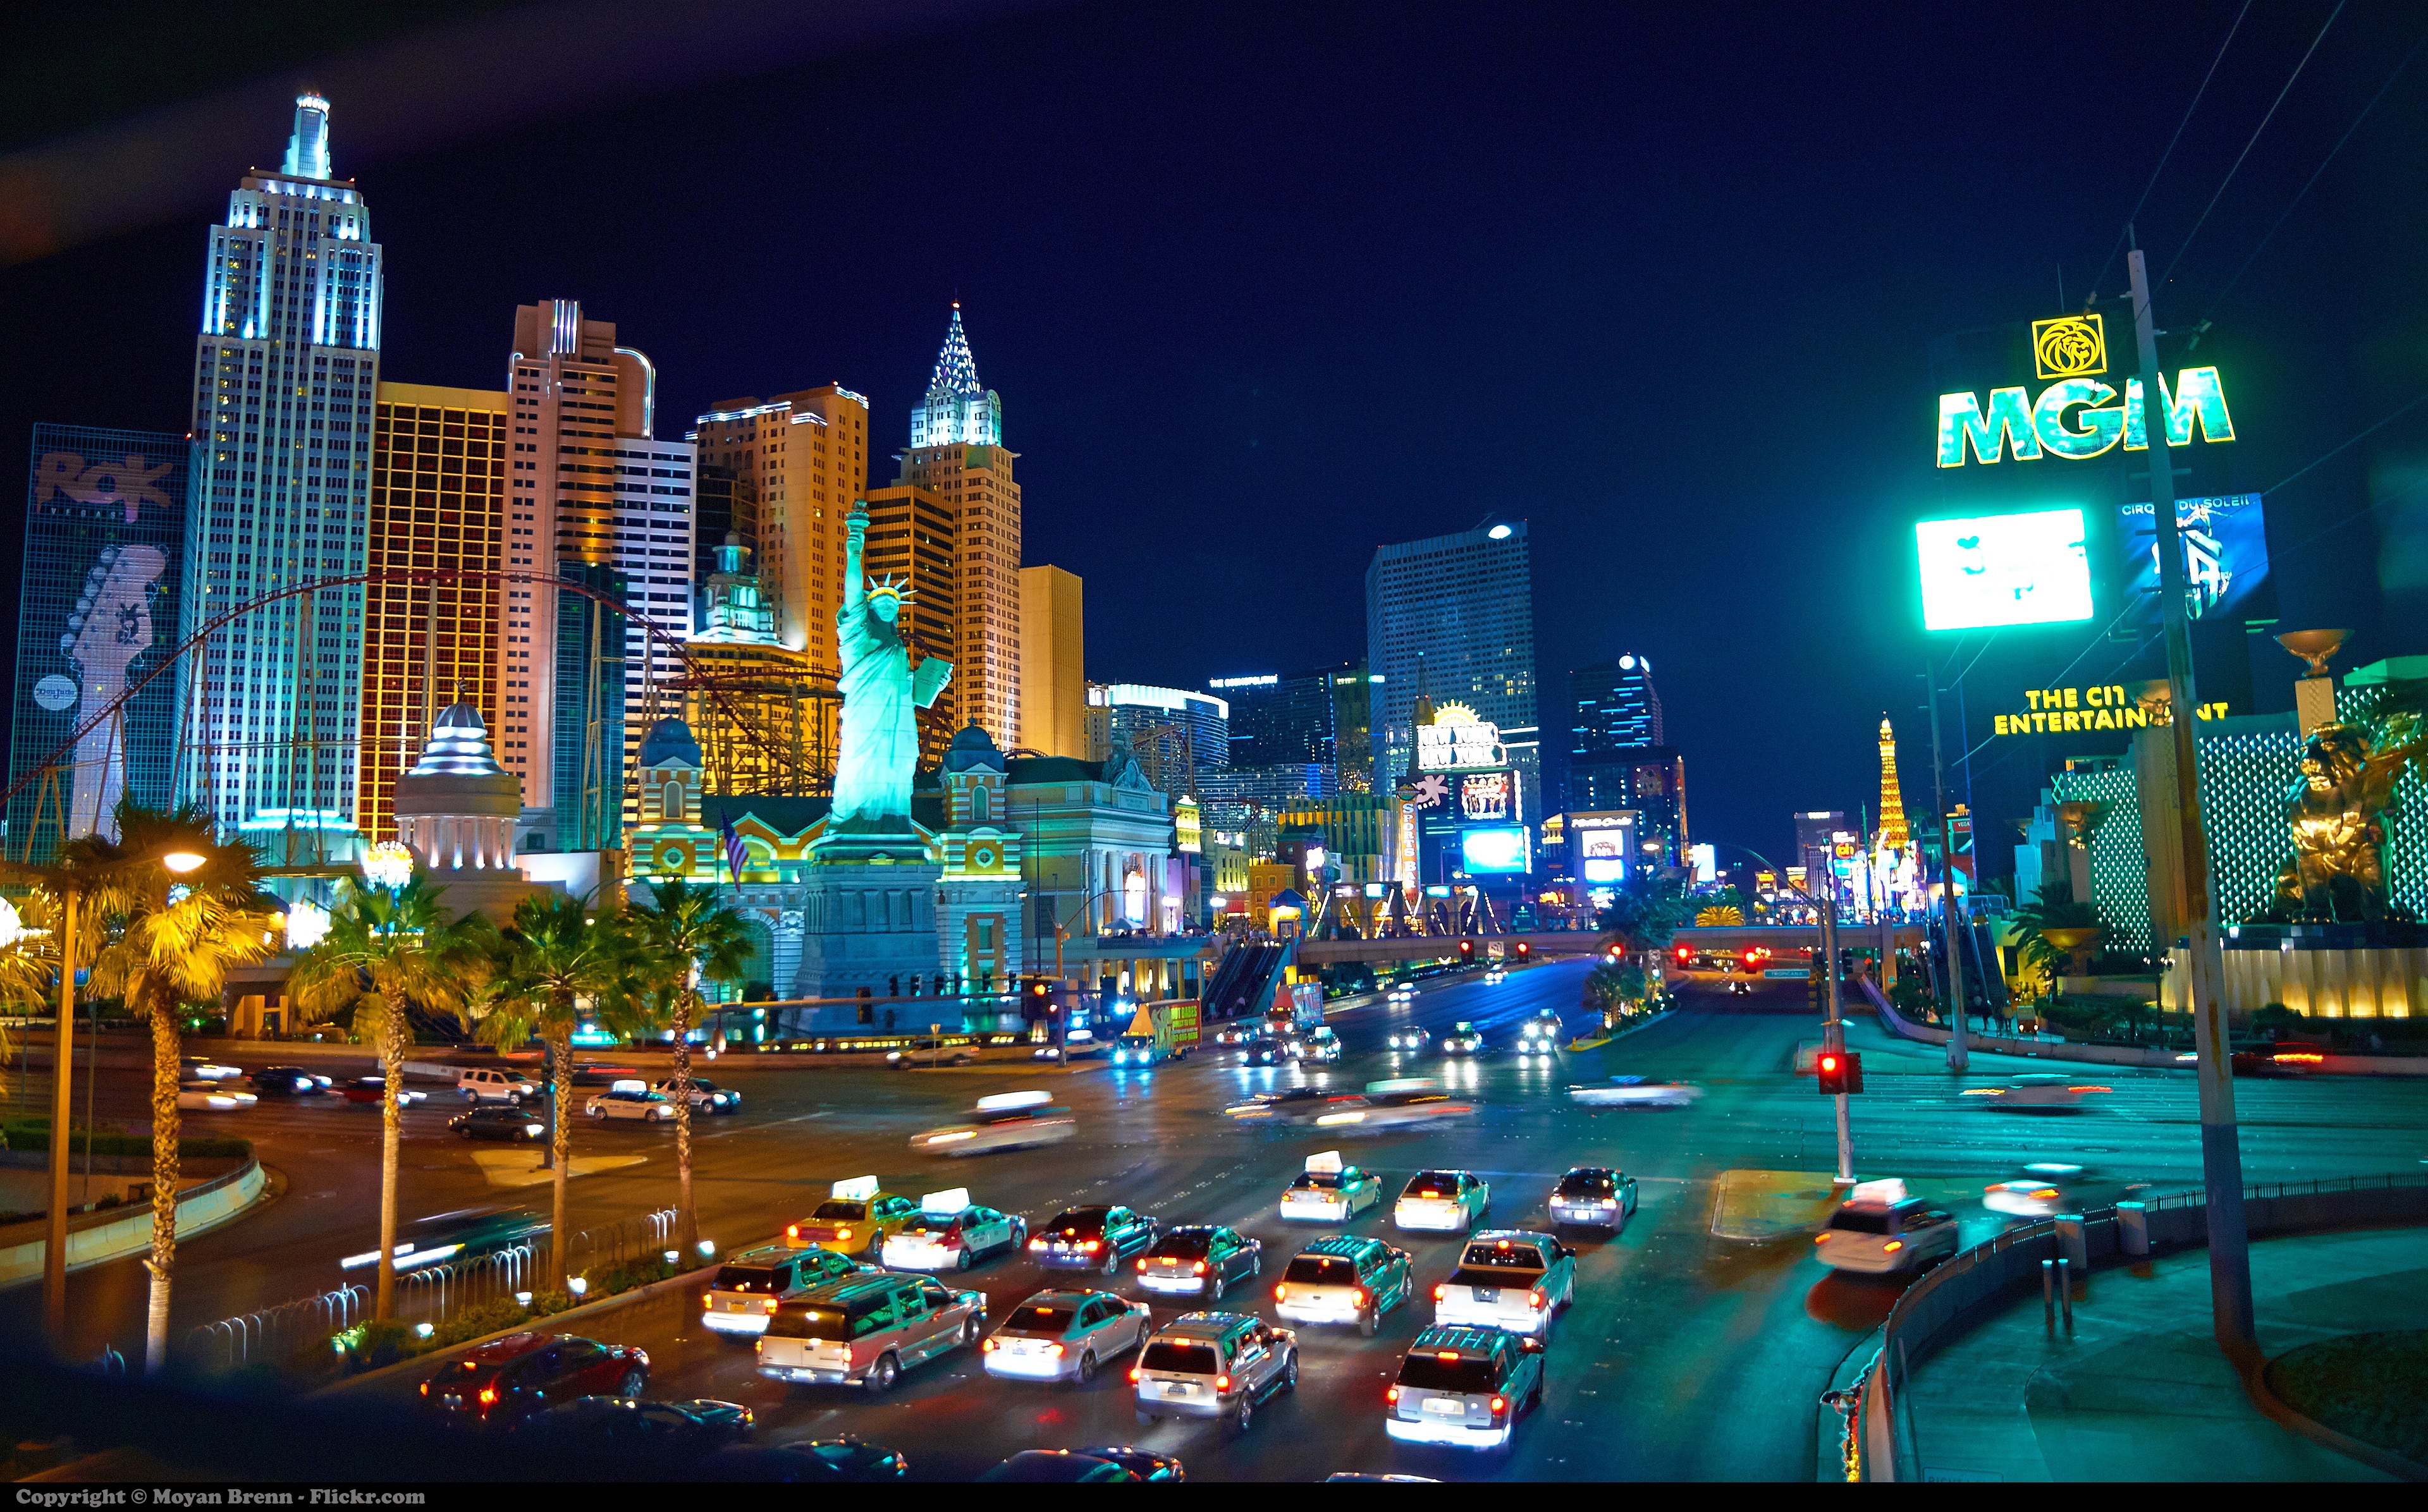 A view of the Las Vegas strip. Credit: Wikimedia Commons.